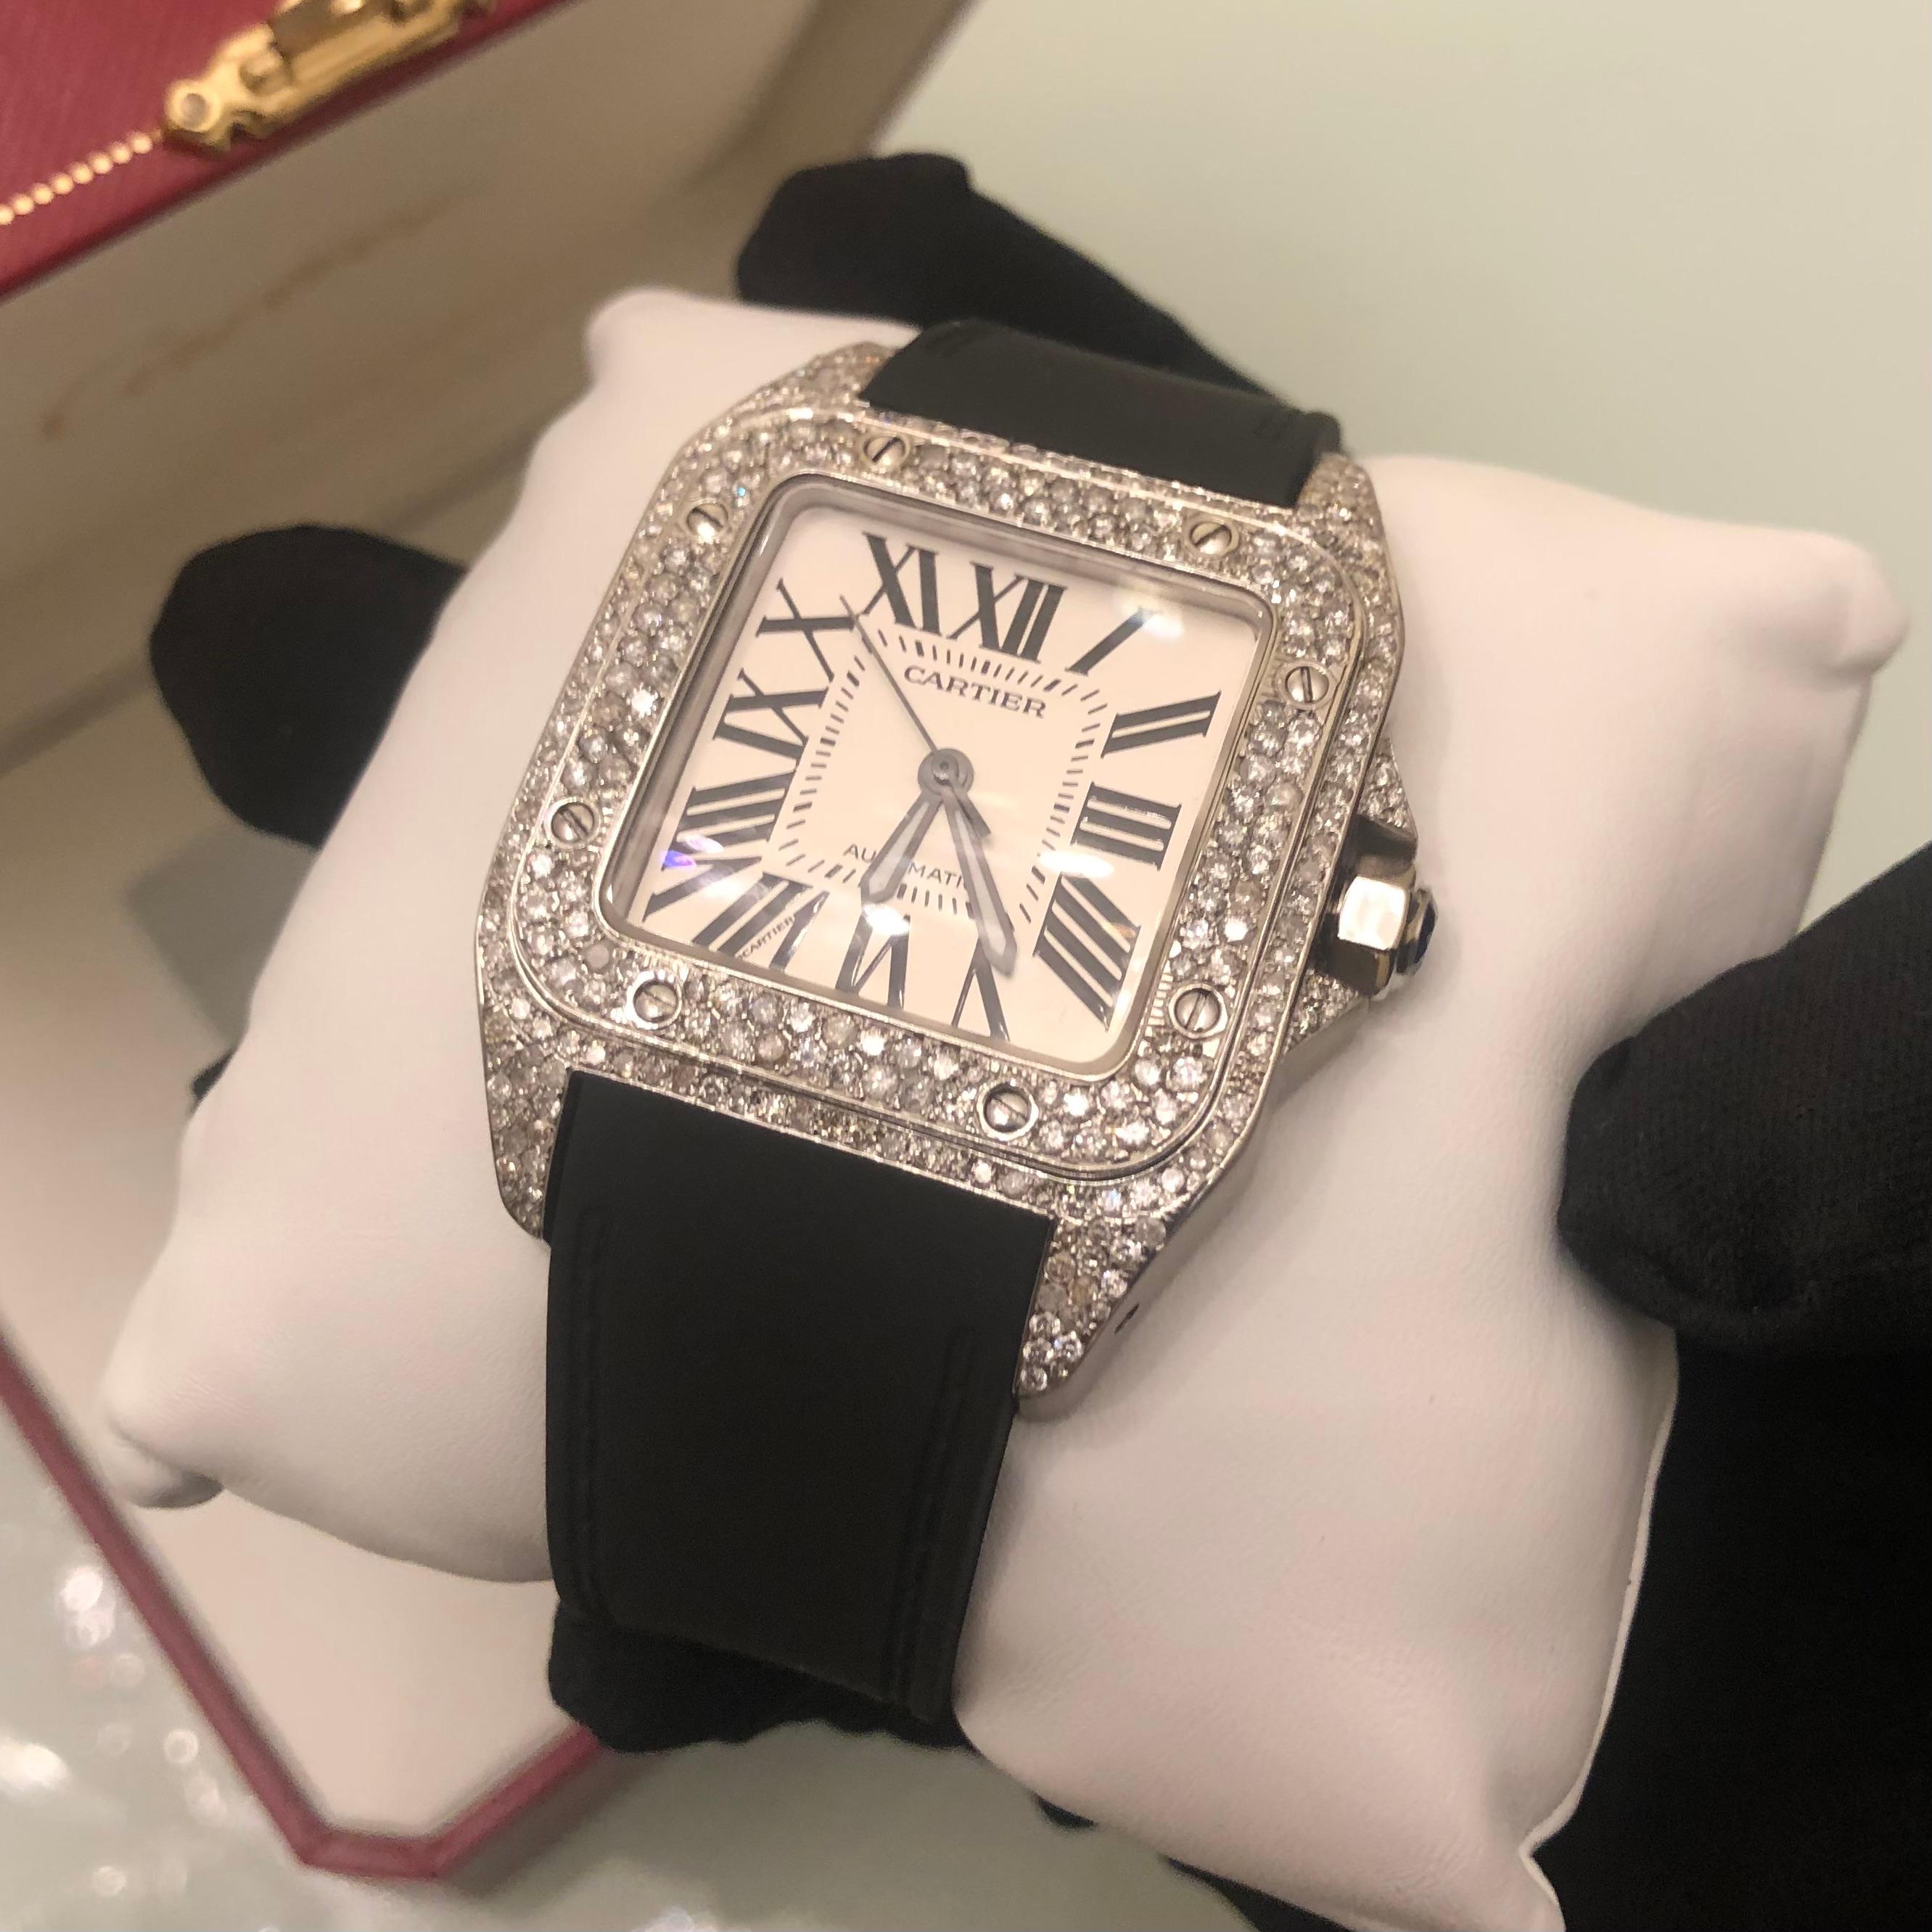 Custom Cartier Santos 100XL complete with box and booklet papers. 

Cartier Santos 100XL is customized hand set with approx. 8 carats of natural earth mined diamonds in the bezel, case lugs, and clasp. The diamonds shine beautifully in the light.